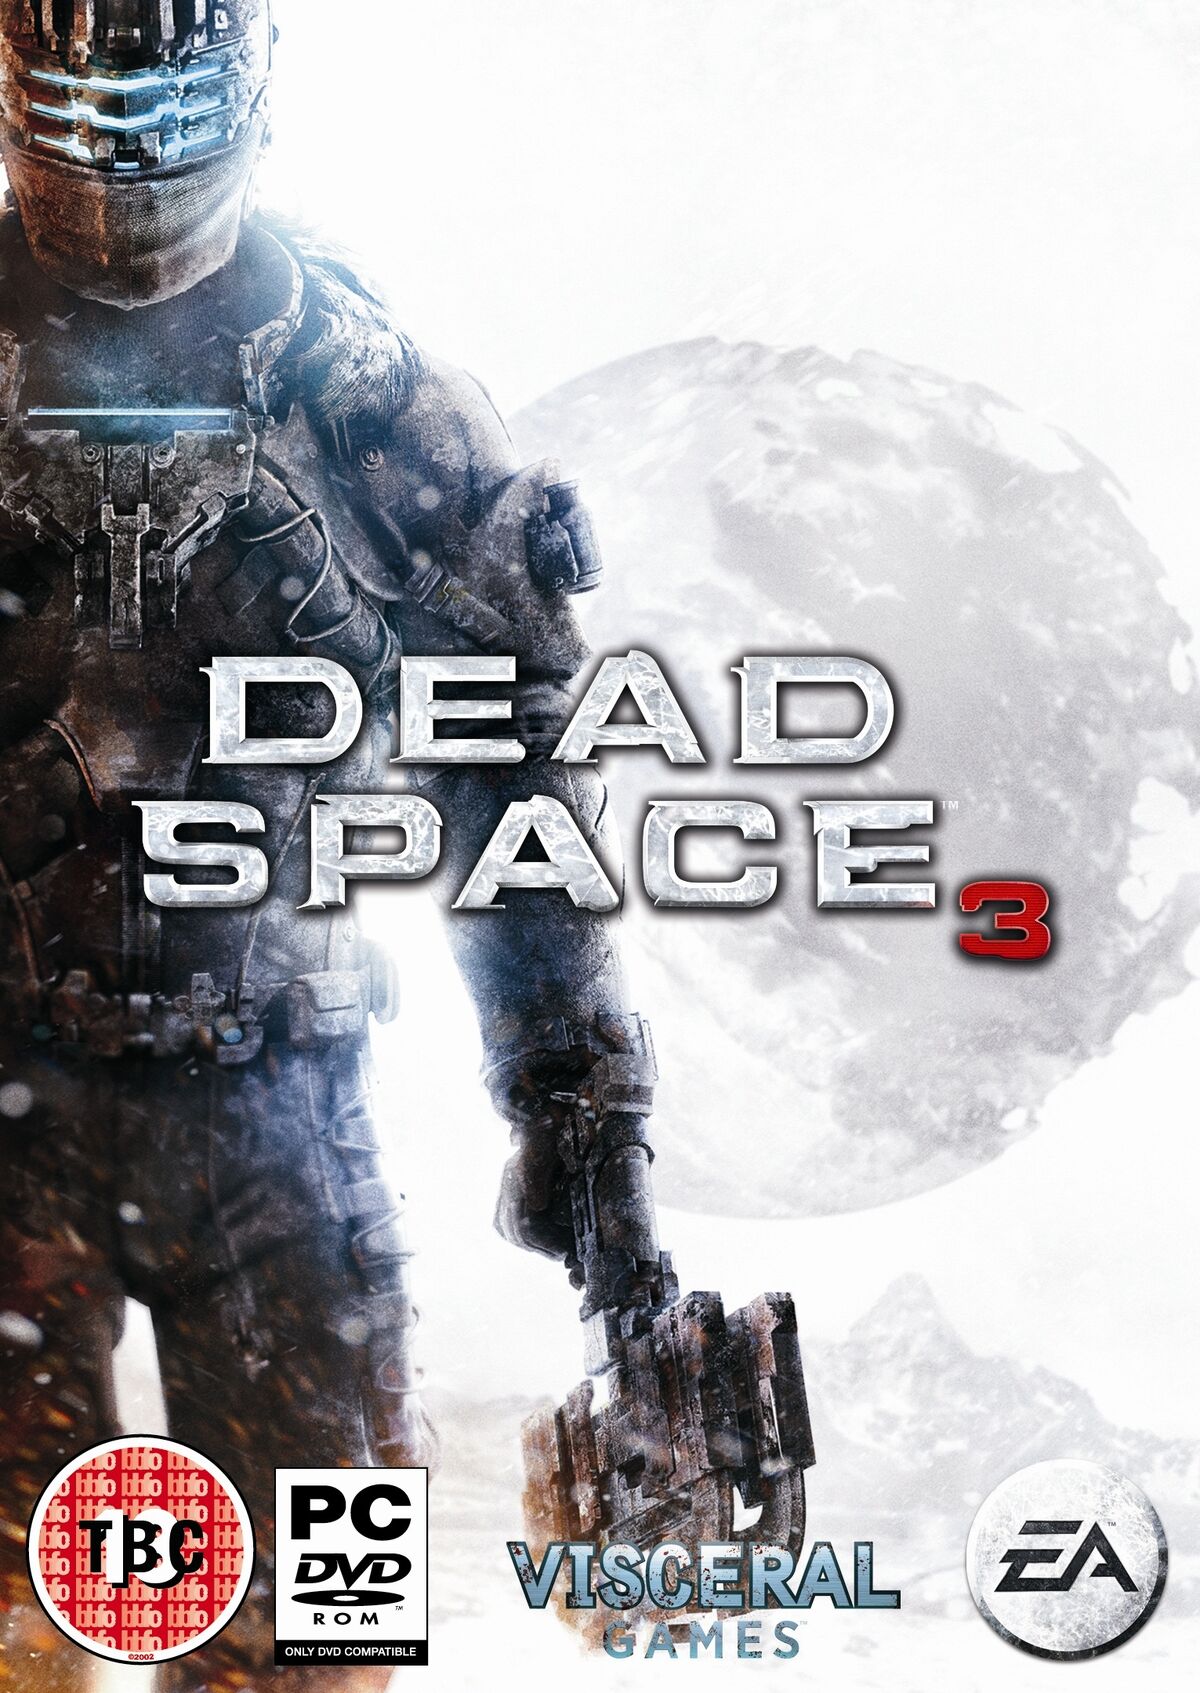 Next wave of Xbox Game Pass games includes Dead Space, Cities